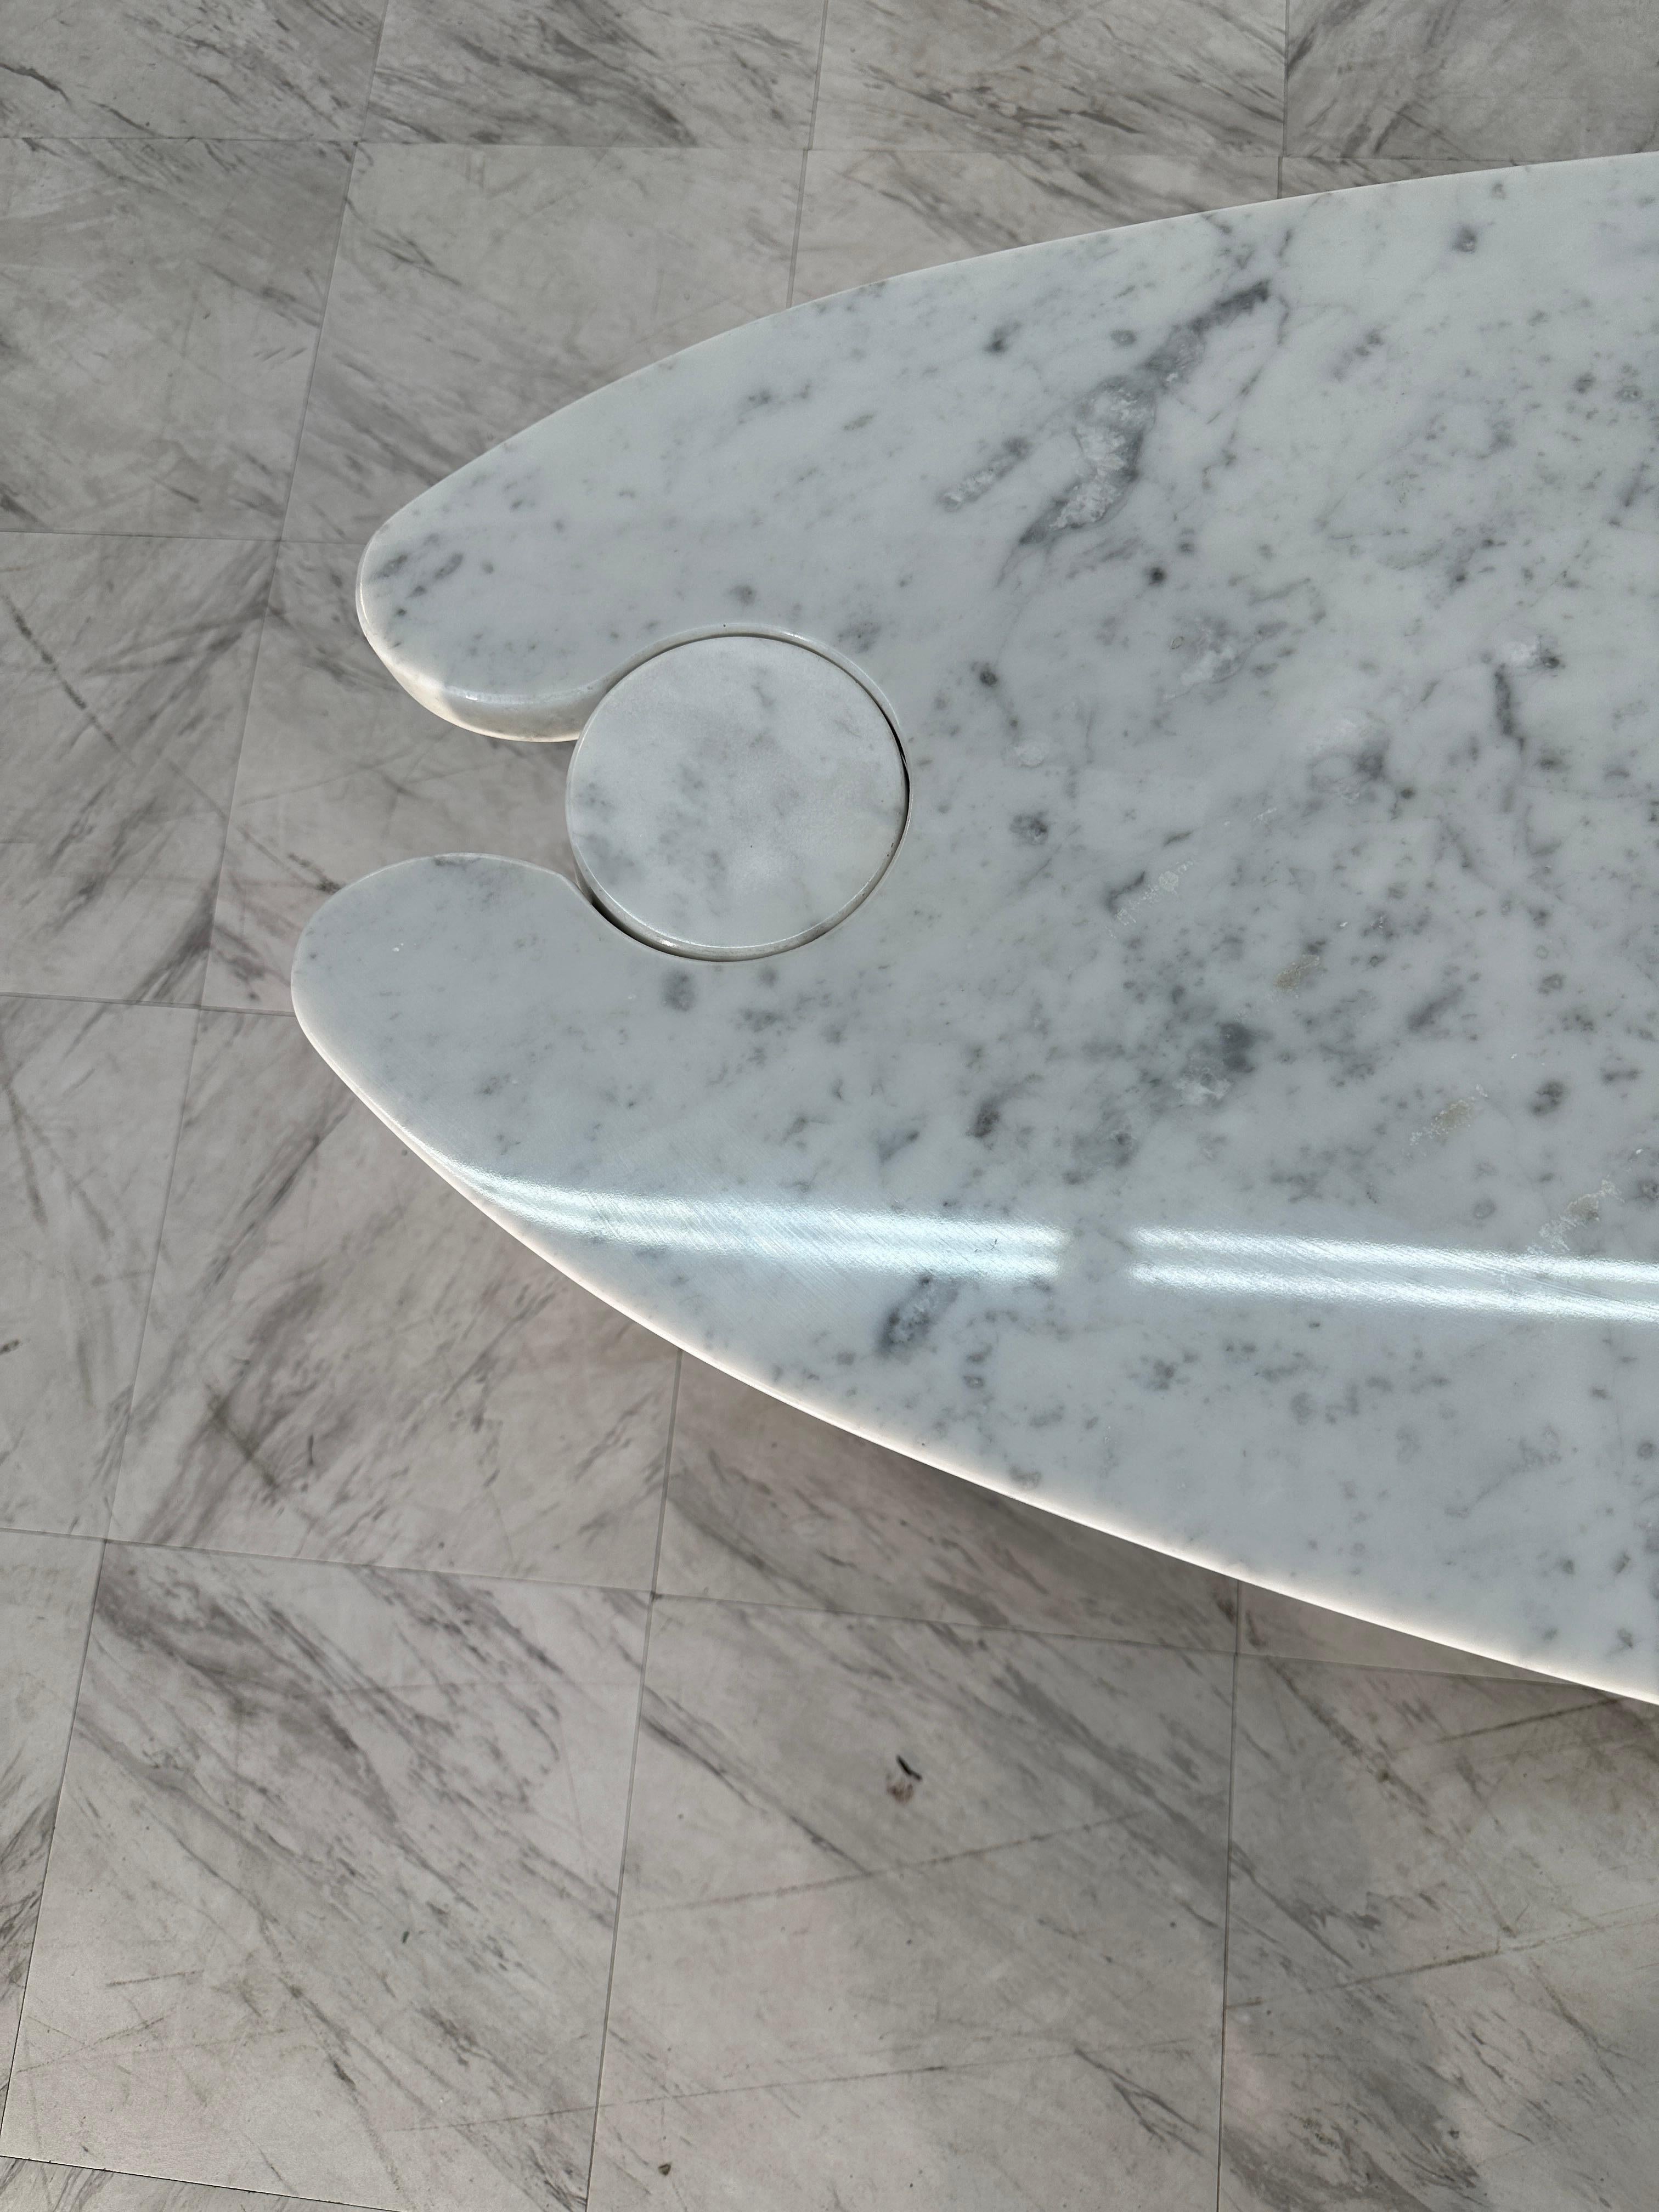 Certainly! The Coffee Table by Angelo Mangiarotti, crafted in the midcentury Italian design of the 1970s, is a striking piece characterized by its oval shape. The table features original Skipper conical-shaped pedestals, adding a unique and stylish